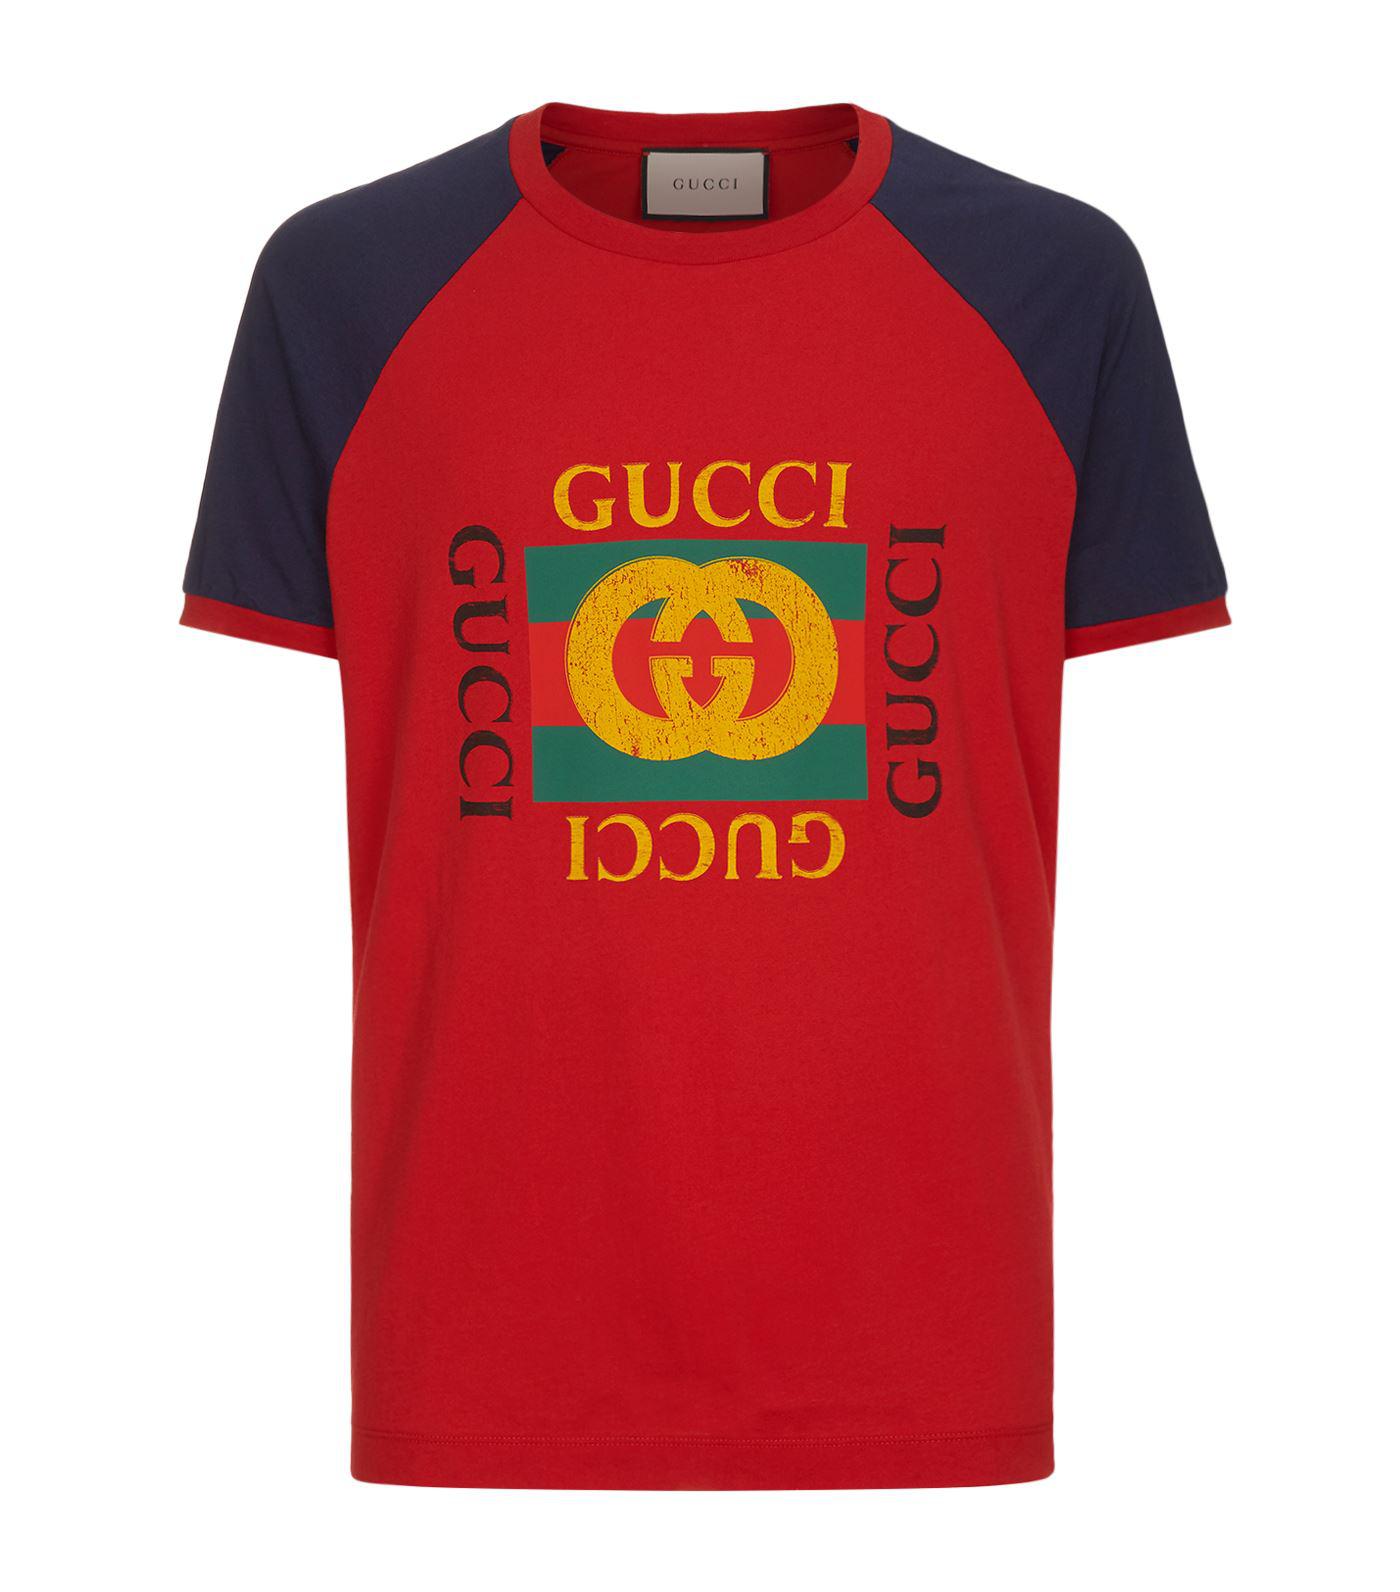 Gucci Cotton Logo Modern Future Motif T-shirt in Red for Men - Lyst